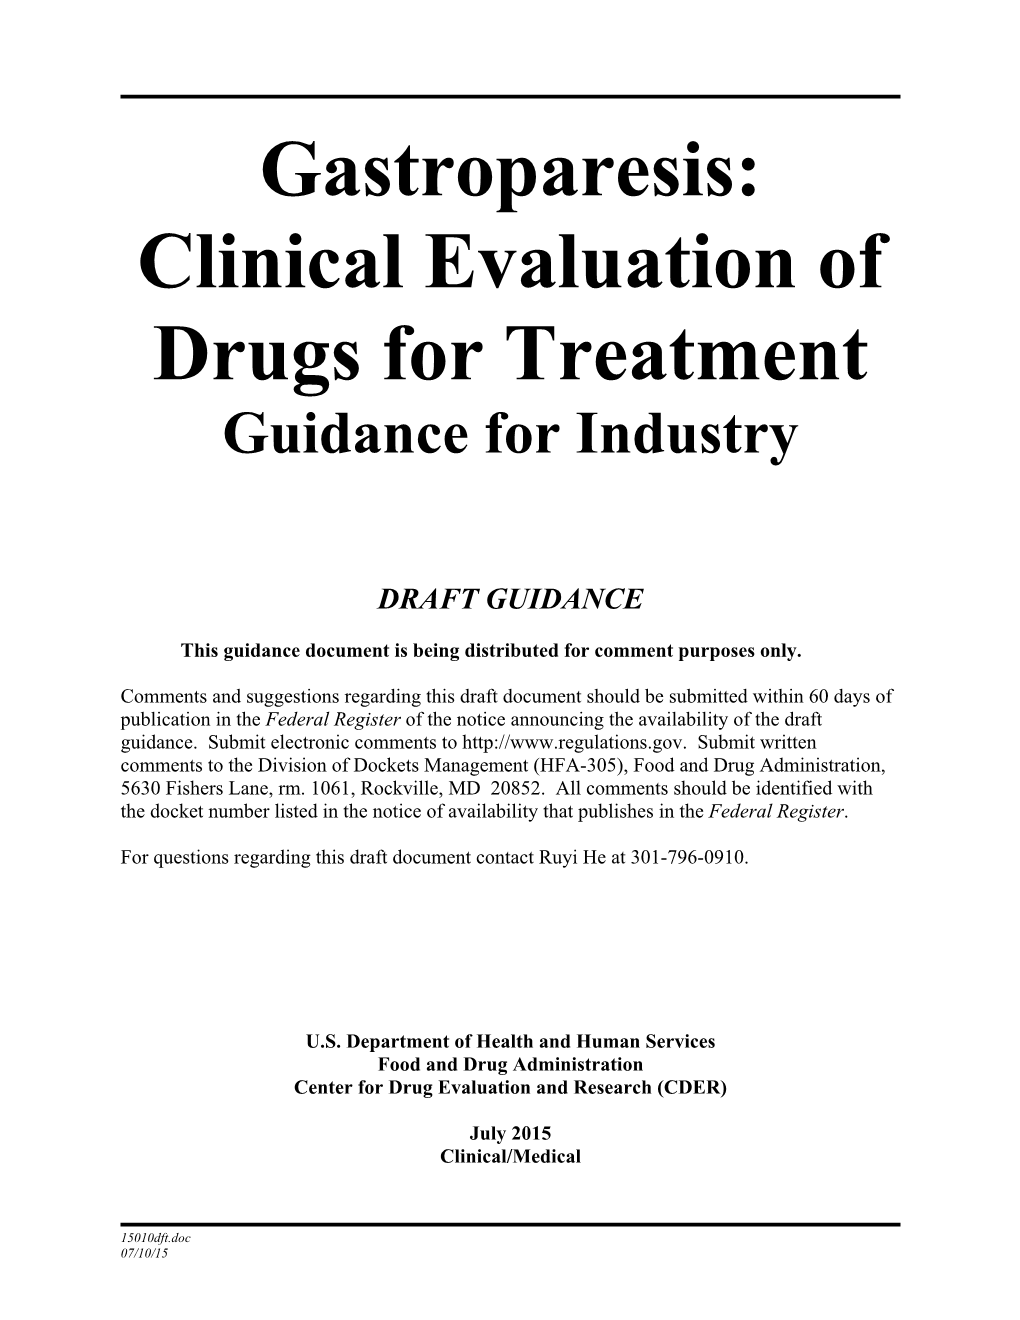 Gastroparesis: Clinical Evaluation of Drugs for Treatment Guidance for Industry